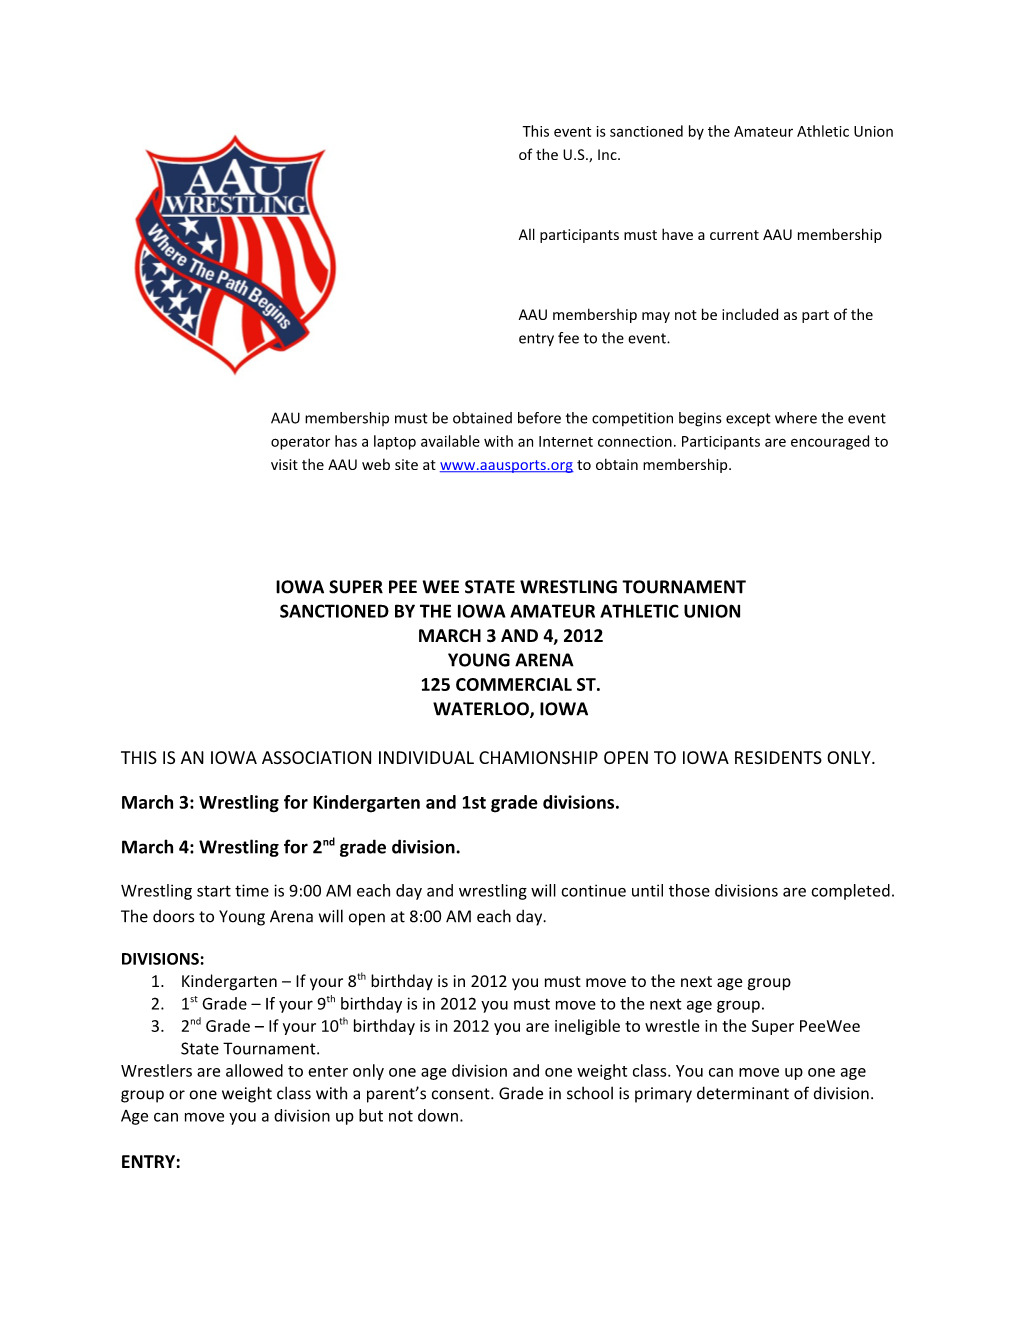 All Participants Must Have a Current AAU Membership